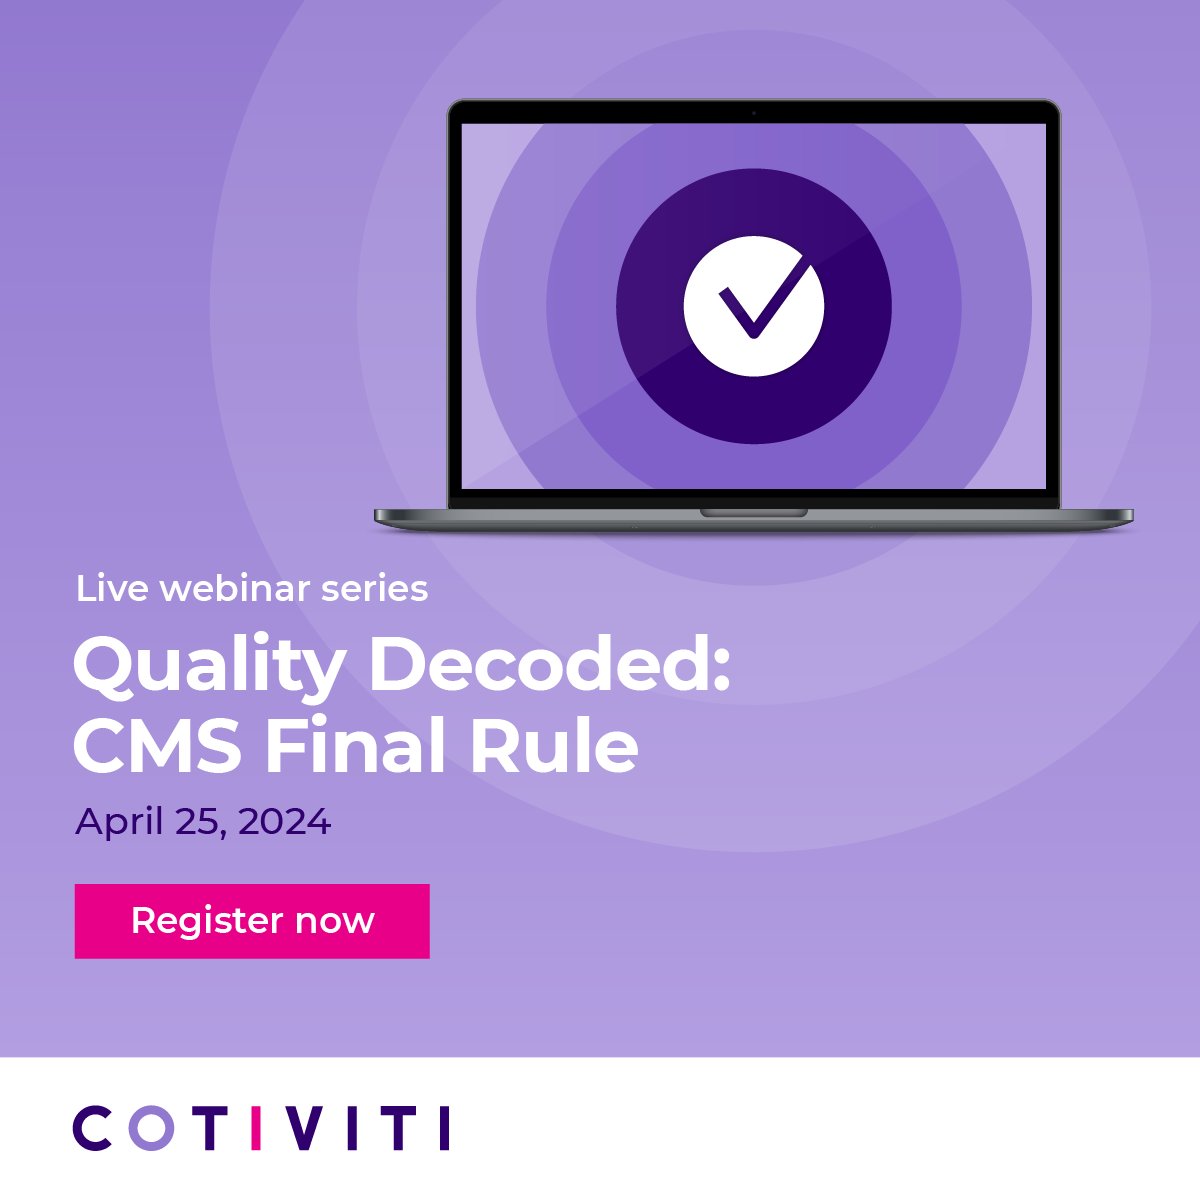 Cotiviti's Quality Decoded webinar series continues on April 25. 

Join us as we prepare for upcoming challenges, analyze the @CMSGov 2025 Final Rule, and provide actionable insights for #HealthPayers. 

Register here ▶ bit.ly/3xneeo3 #HEDIS